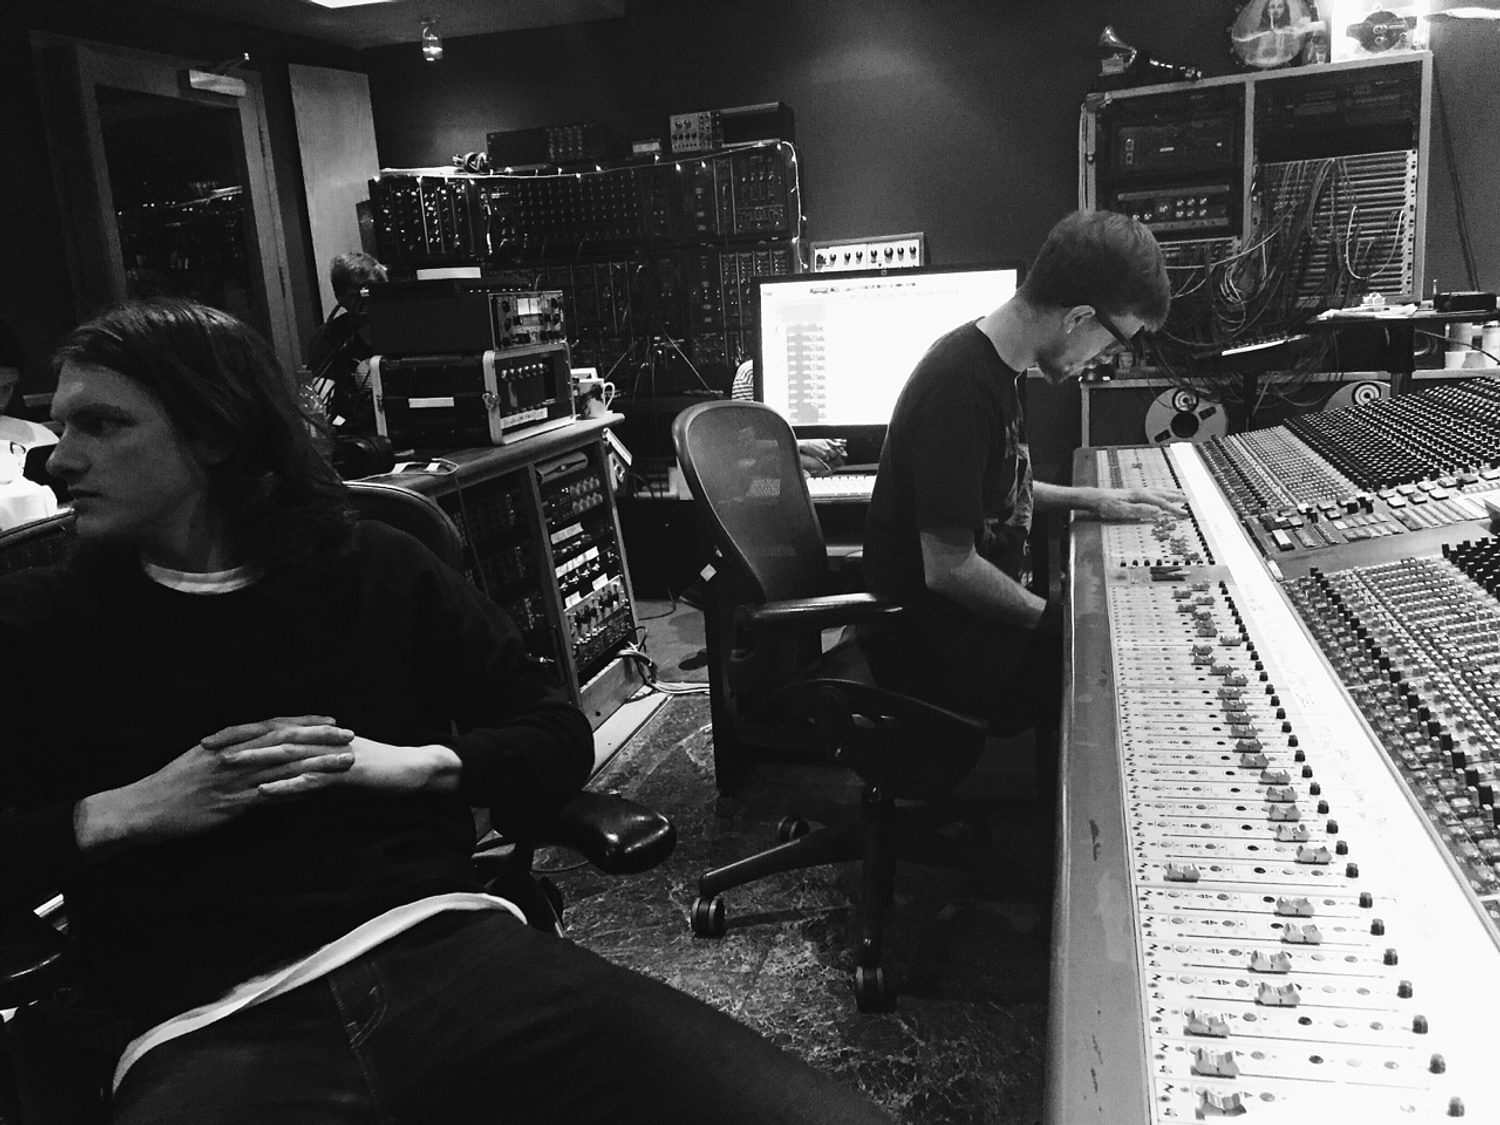 Basement in the studio: "As soon as we realised it was going to be possible to do things with Basement again we all felt motivated"